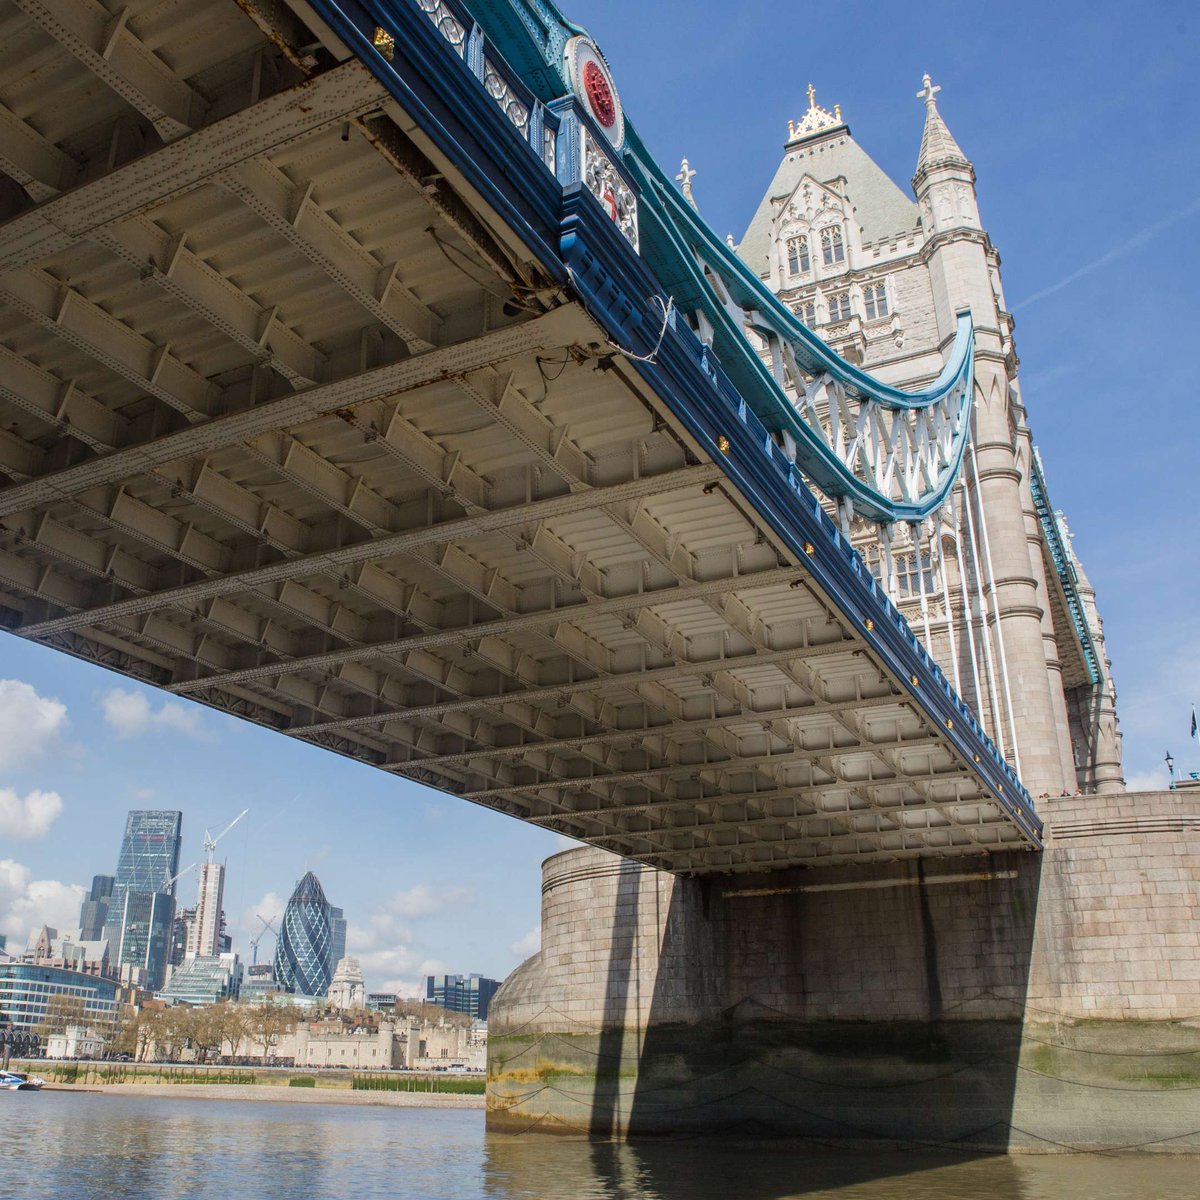 Did you know that the depth of the Thames changes drastically? ♒

The River is around 20 metres at its deepest but only around 1.5 meters deep at Tower Bridge.